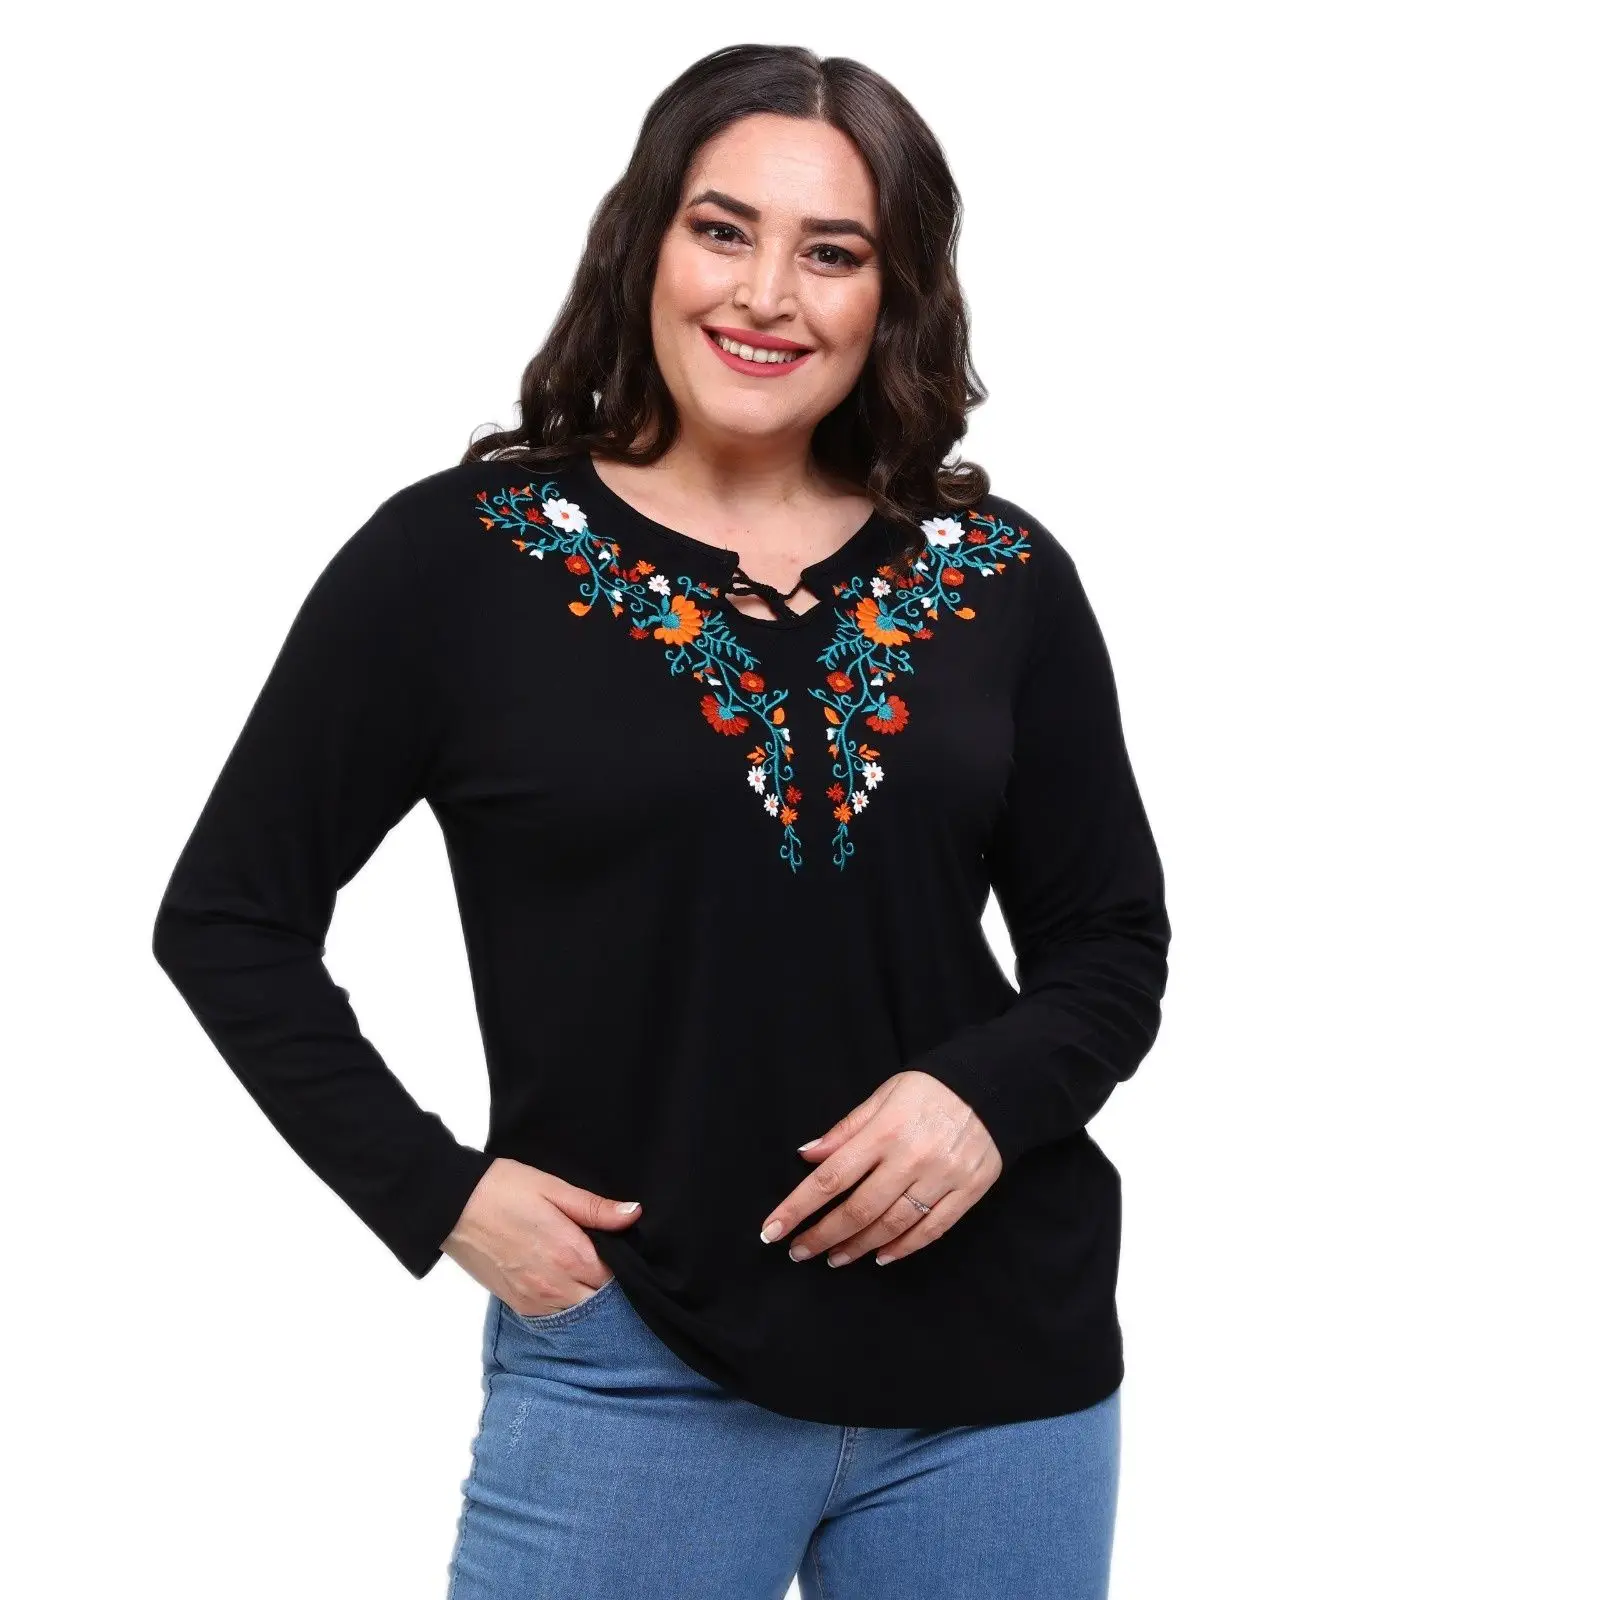 Women’s Plus Size Blouse Colorful Flower Embroidery Detail, Designed and Made in Turkey, New Arrival stefano zuffi leonardo in detail